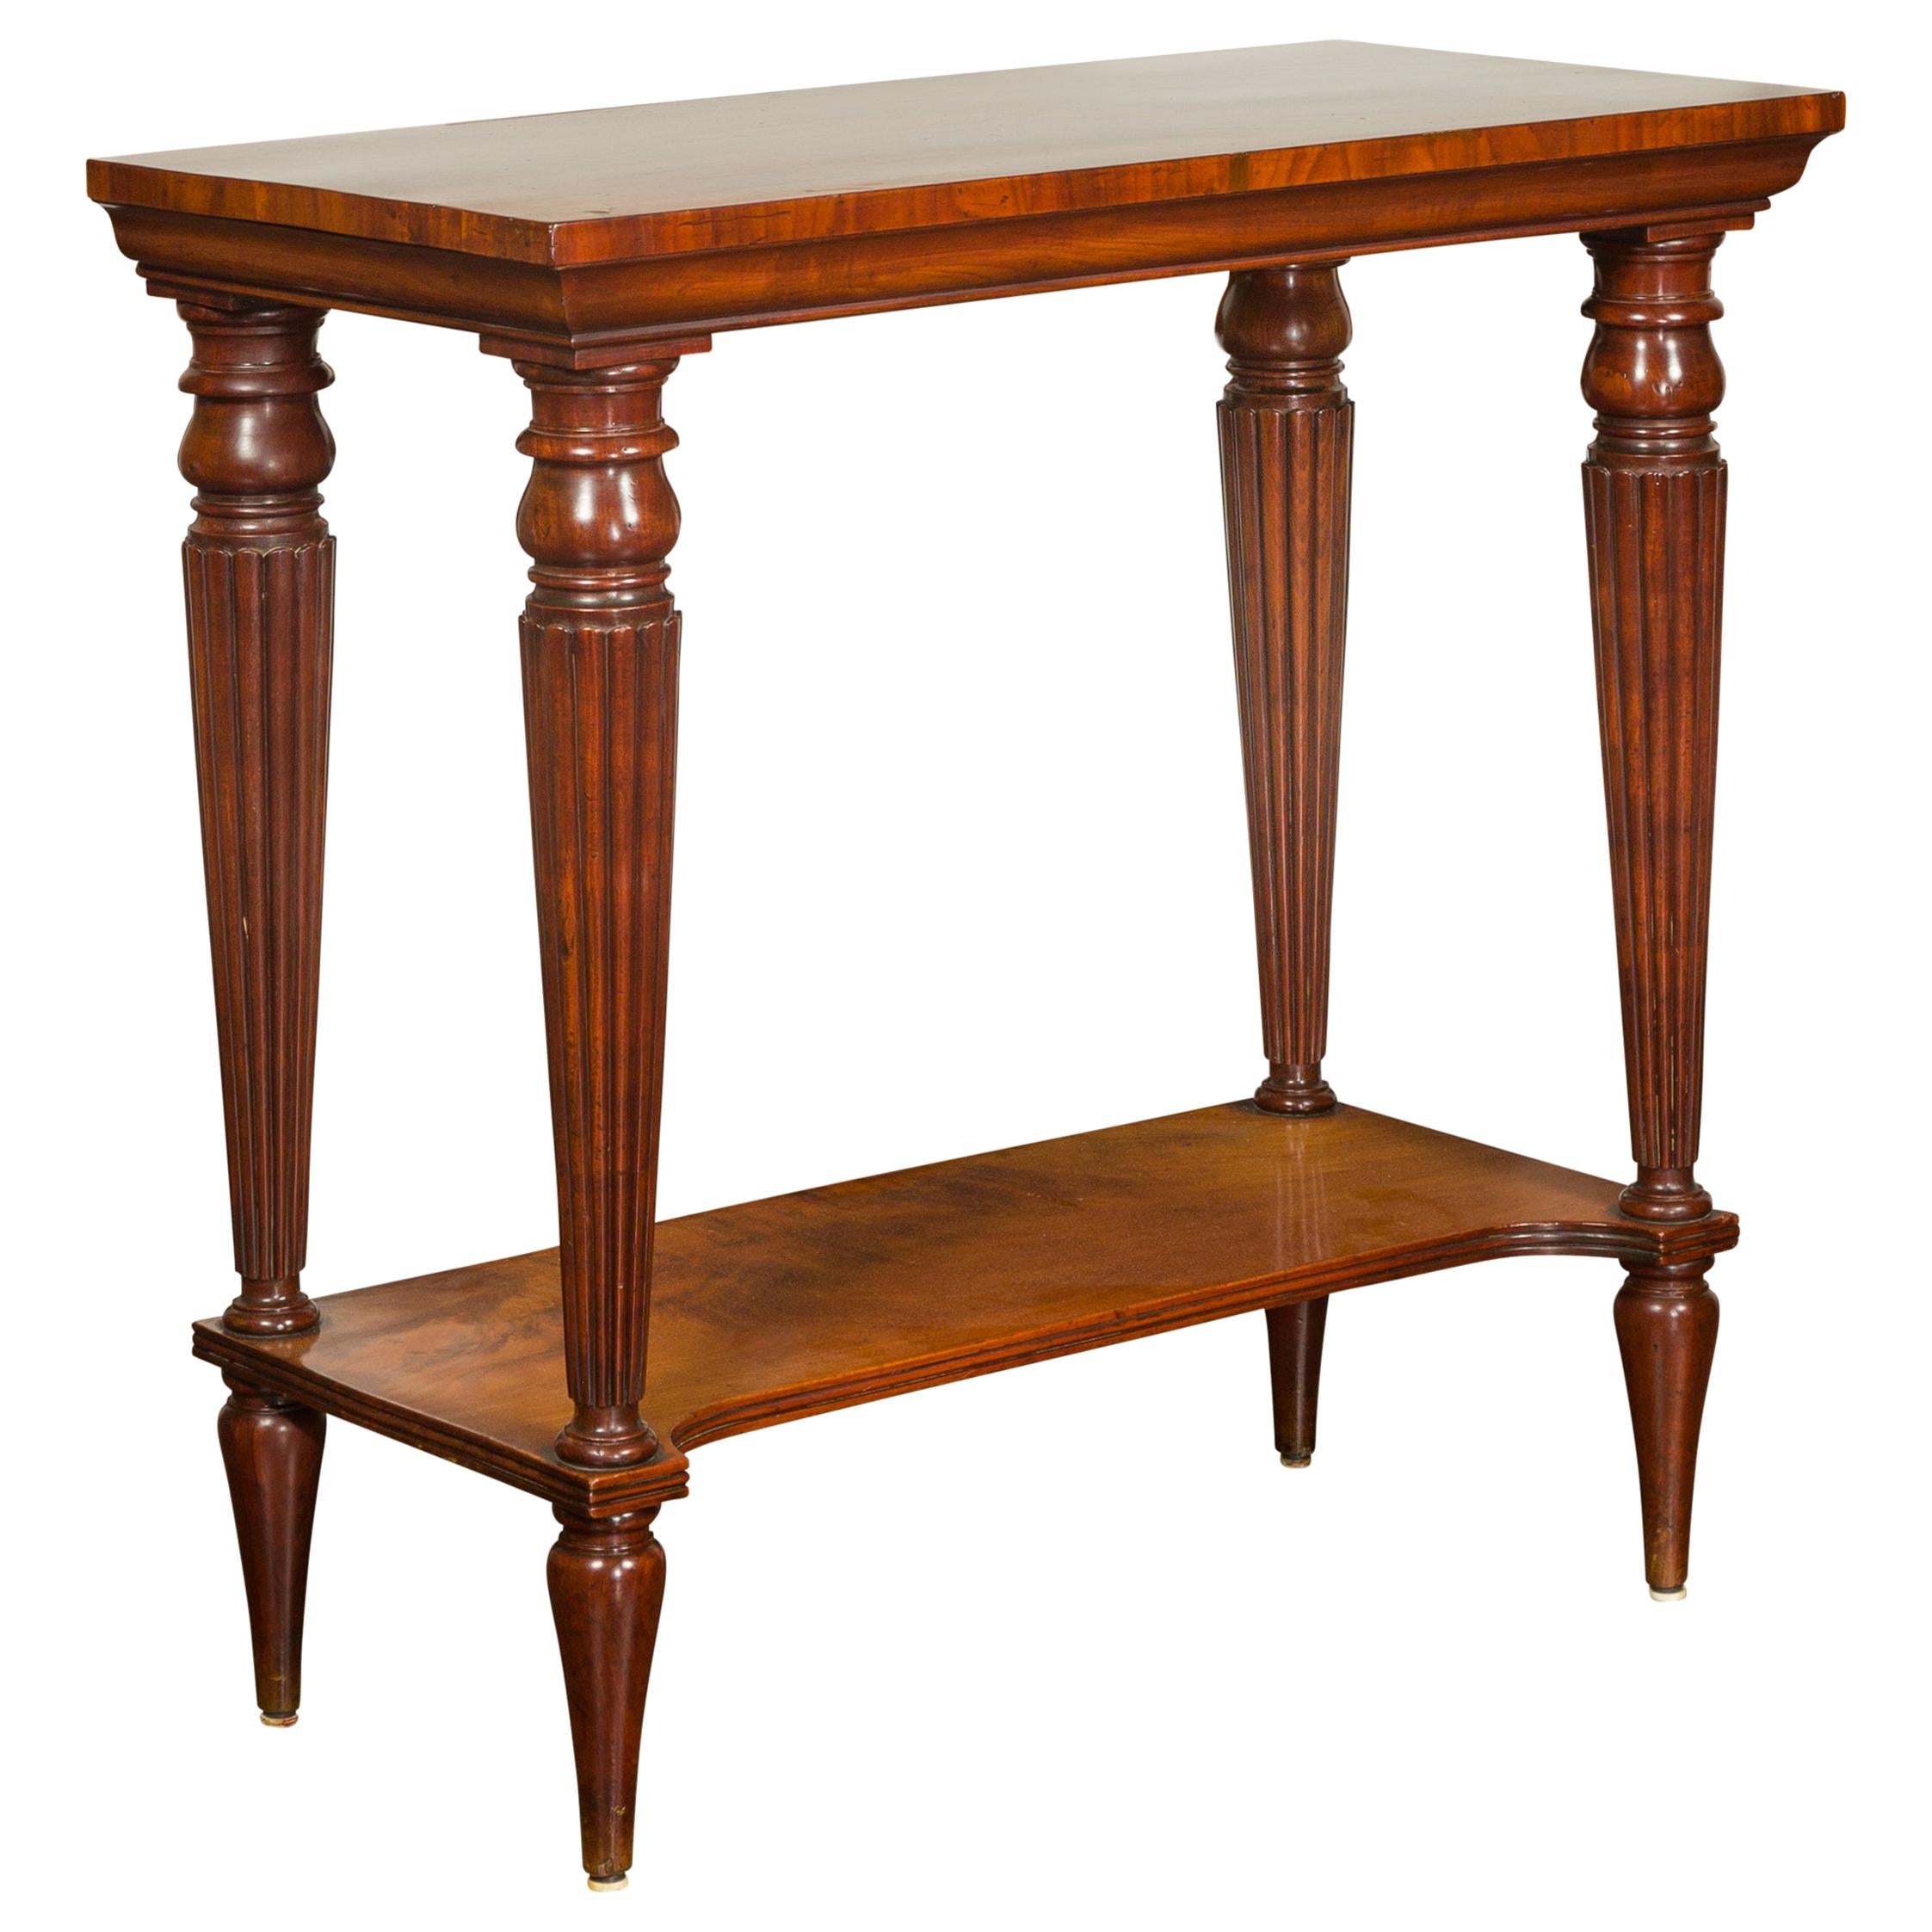 English Regency Period 1820s Console Table in the Manner of Gillows London For Sale